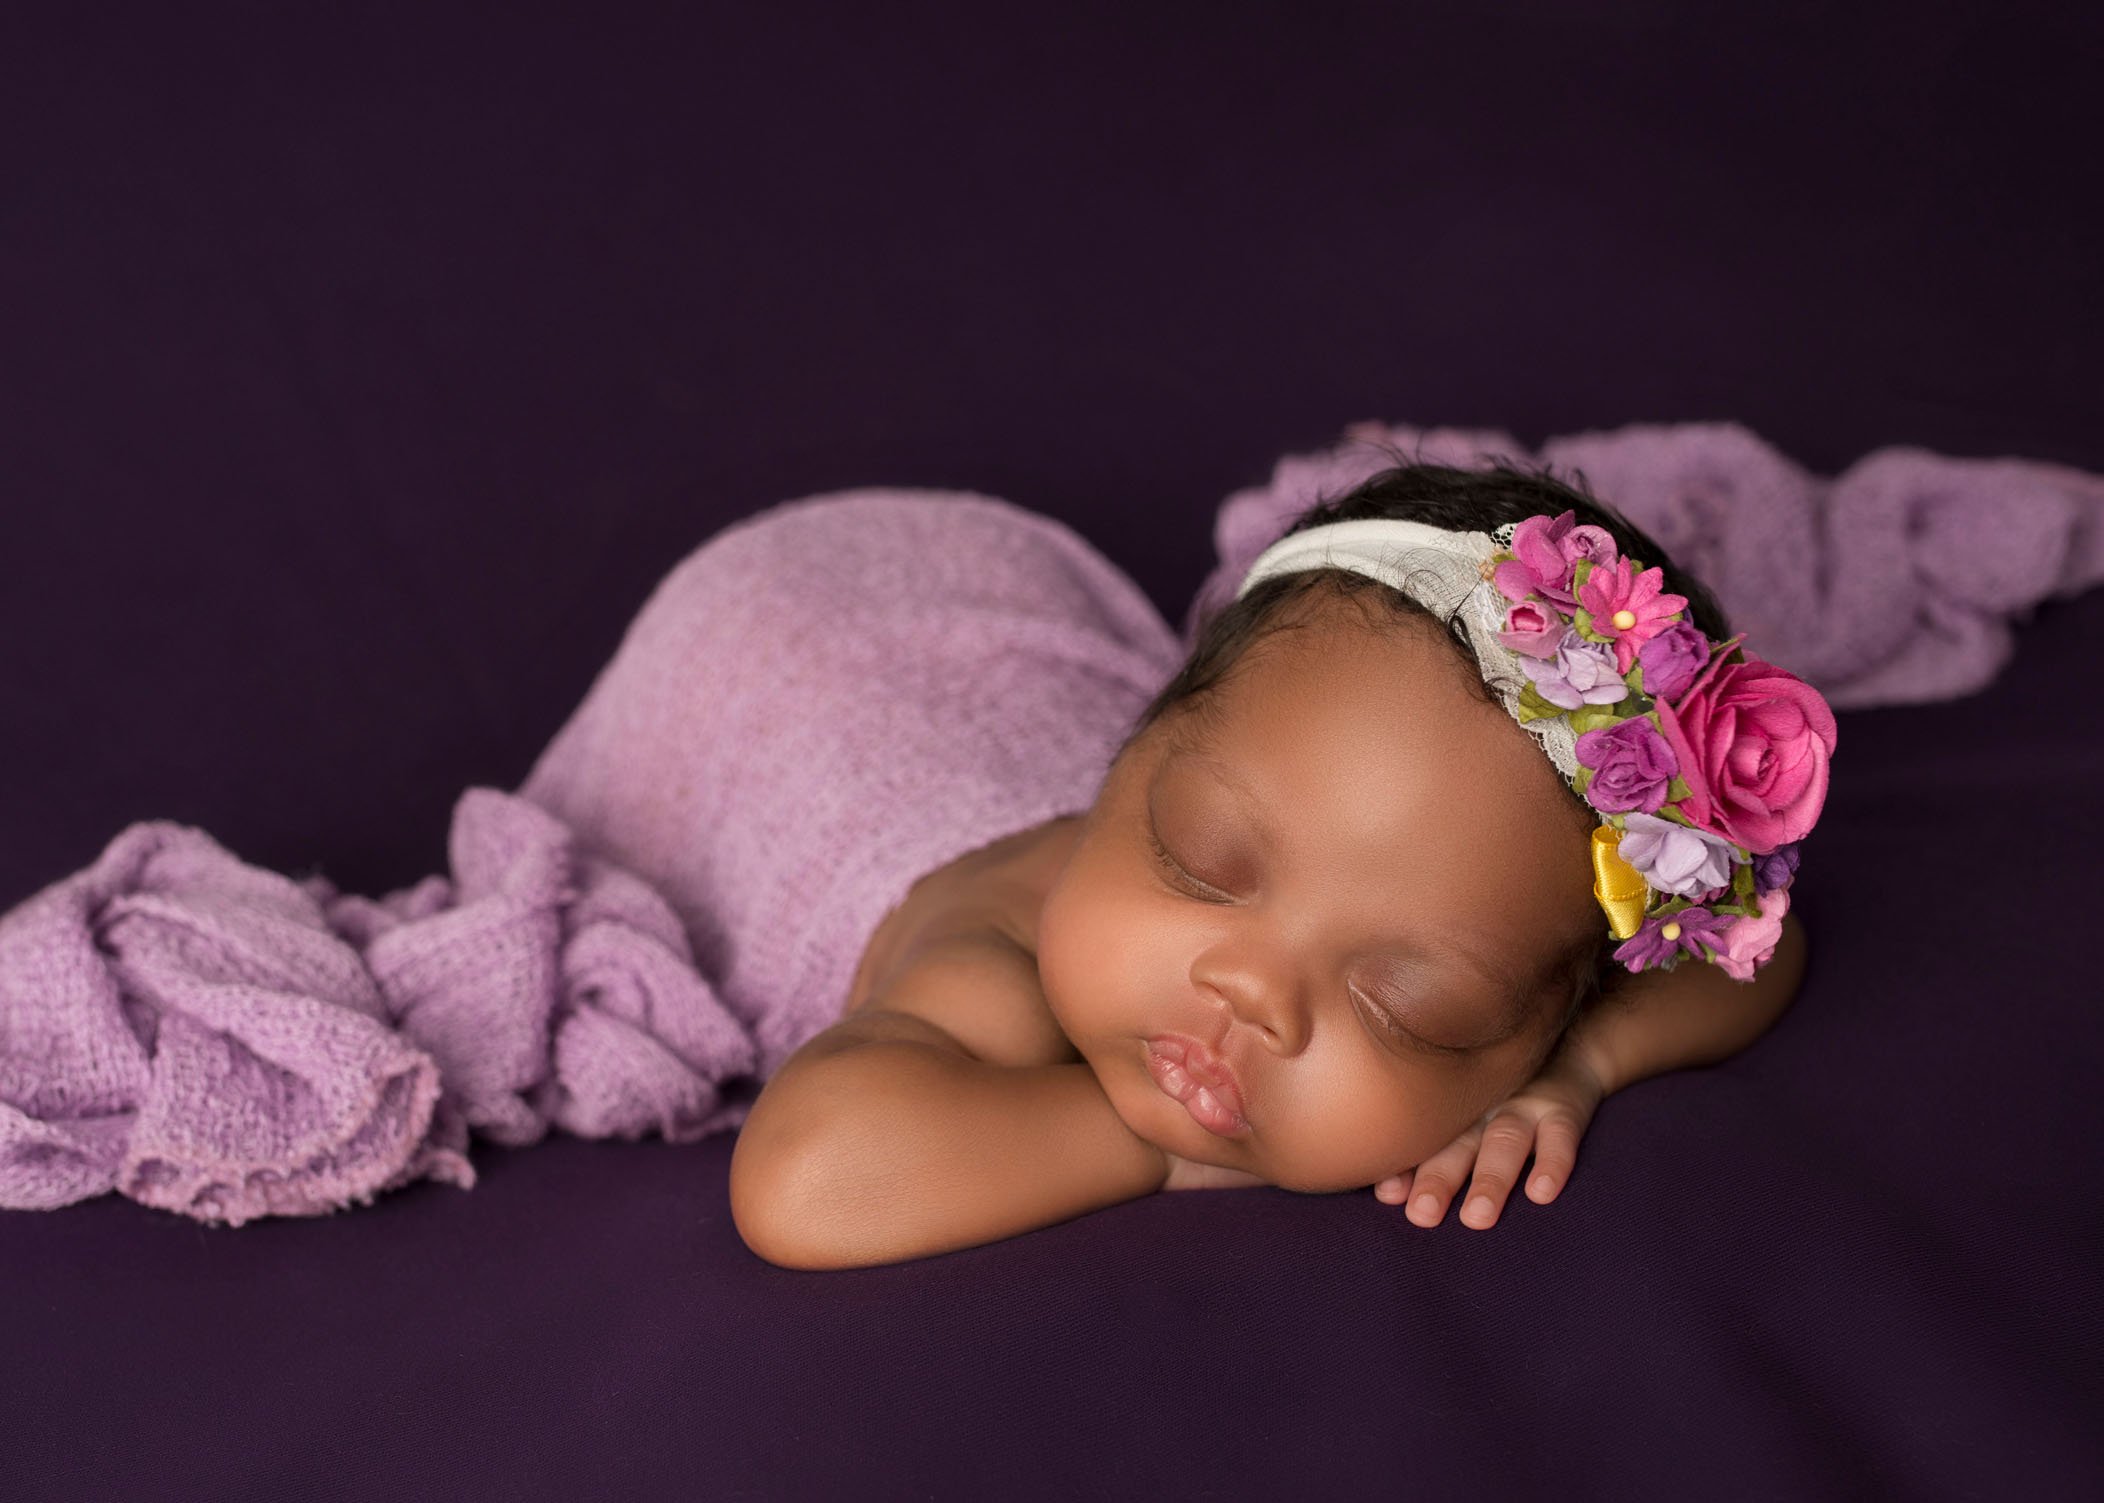 african-american newborn baby girl sleeping with her head on her hands draped in lavender blanket